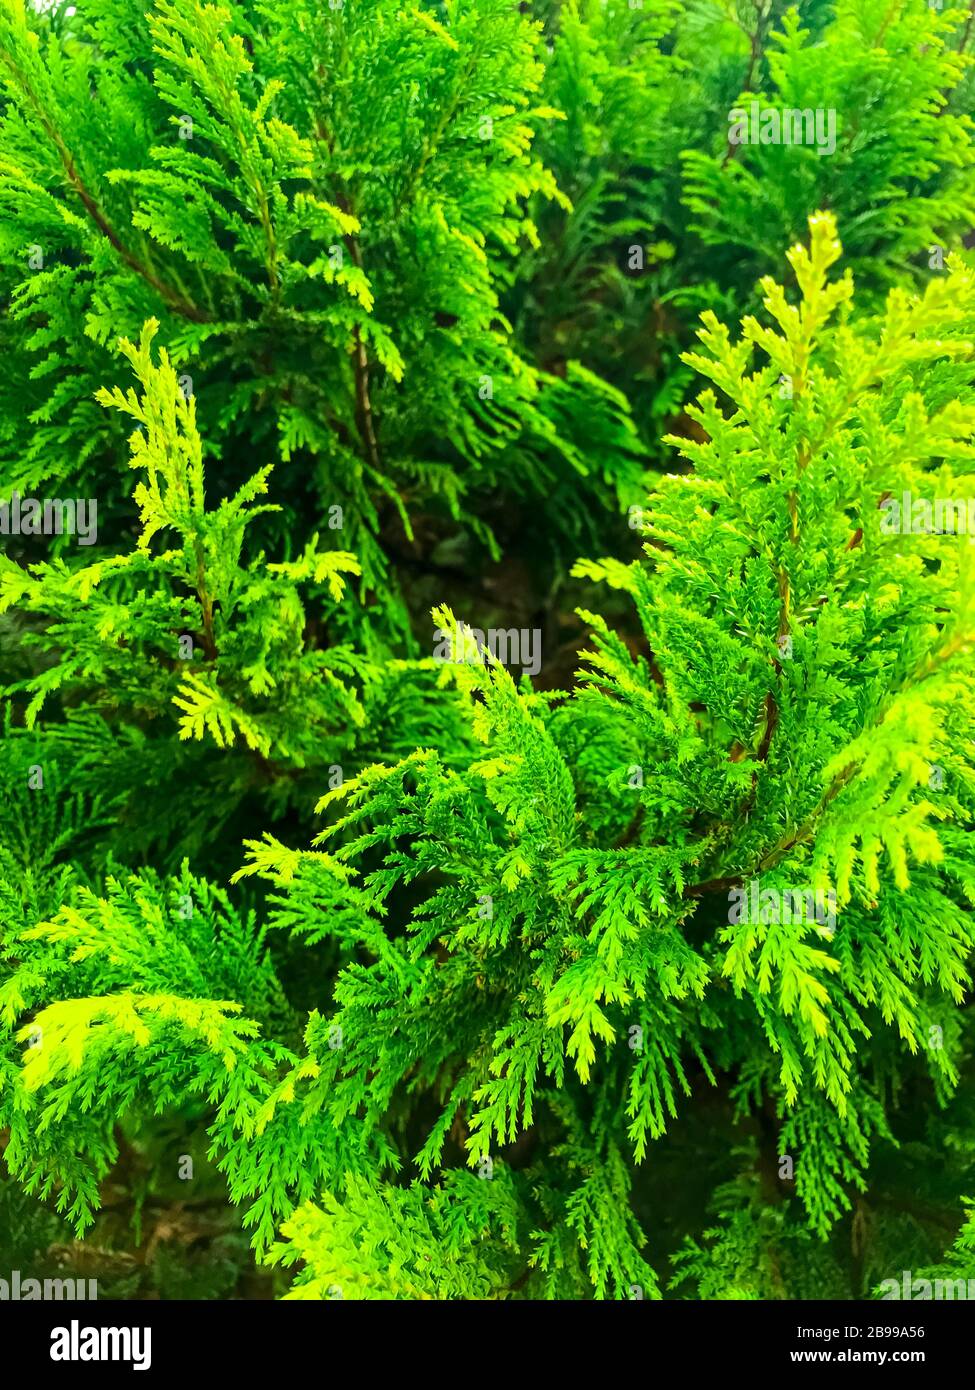 Floral background from green branches of thuja. Studio Photo Stock Photo